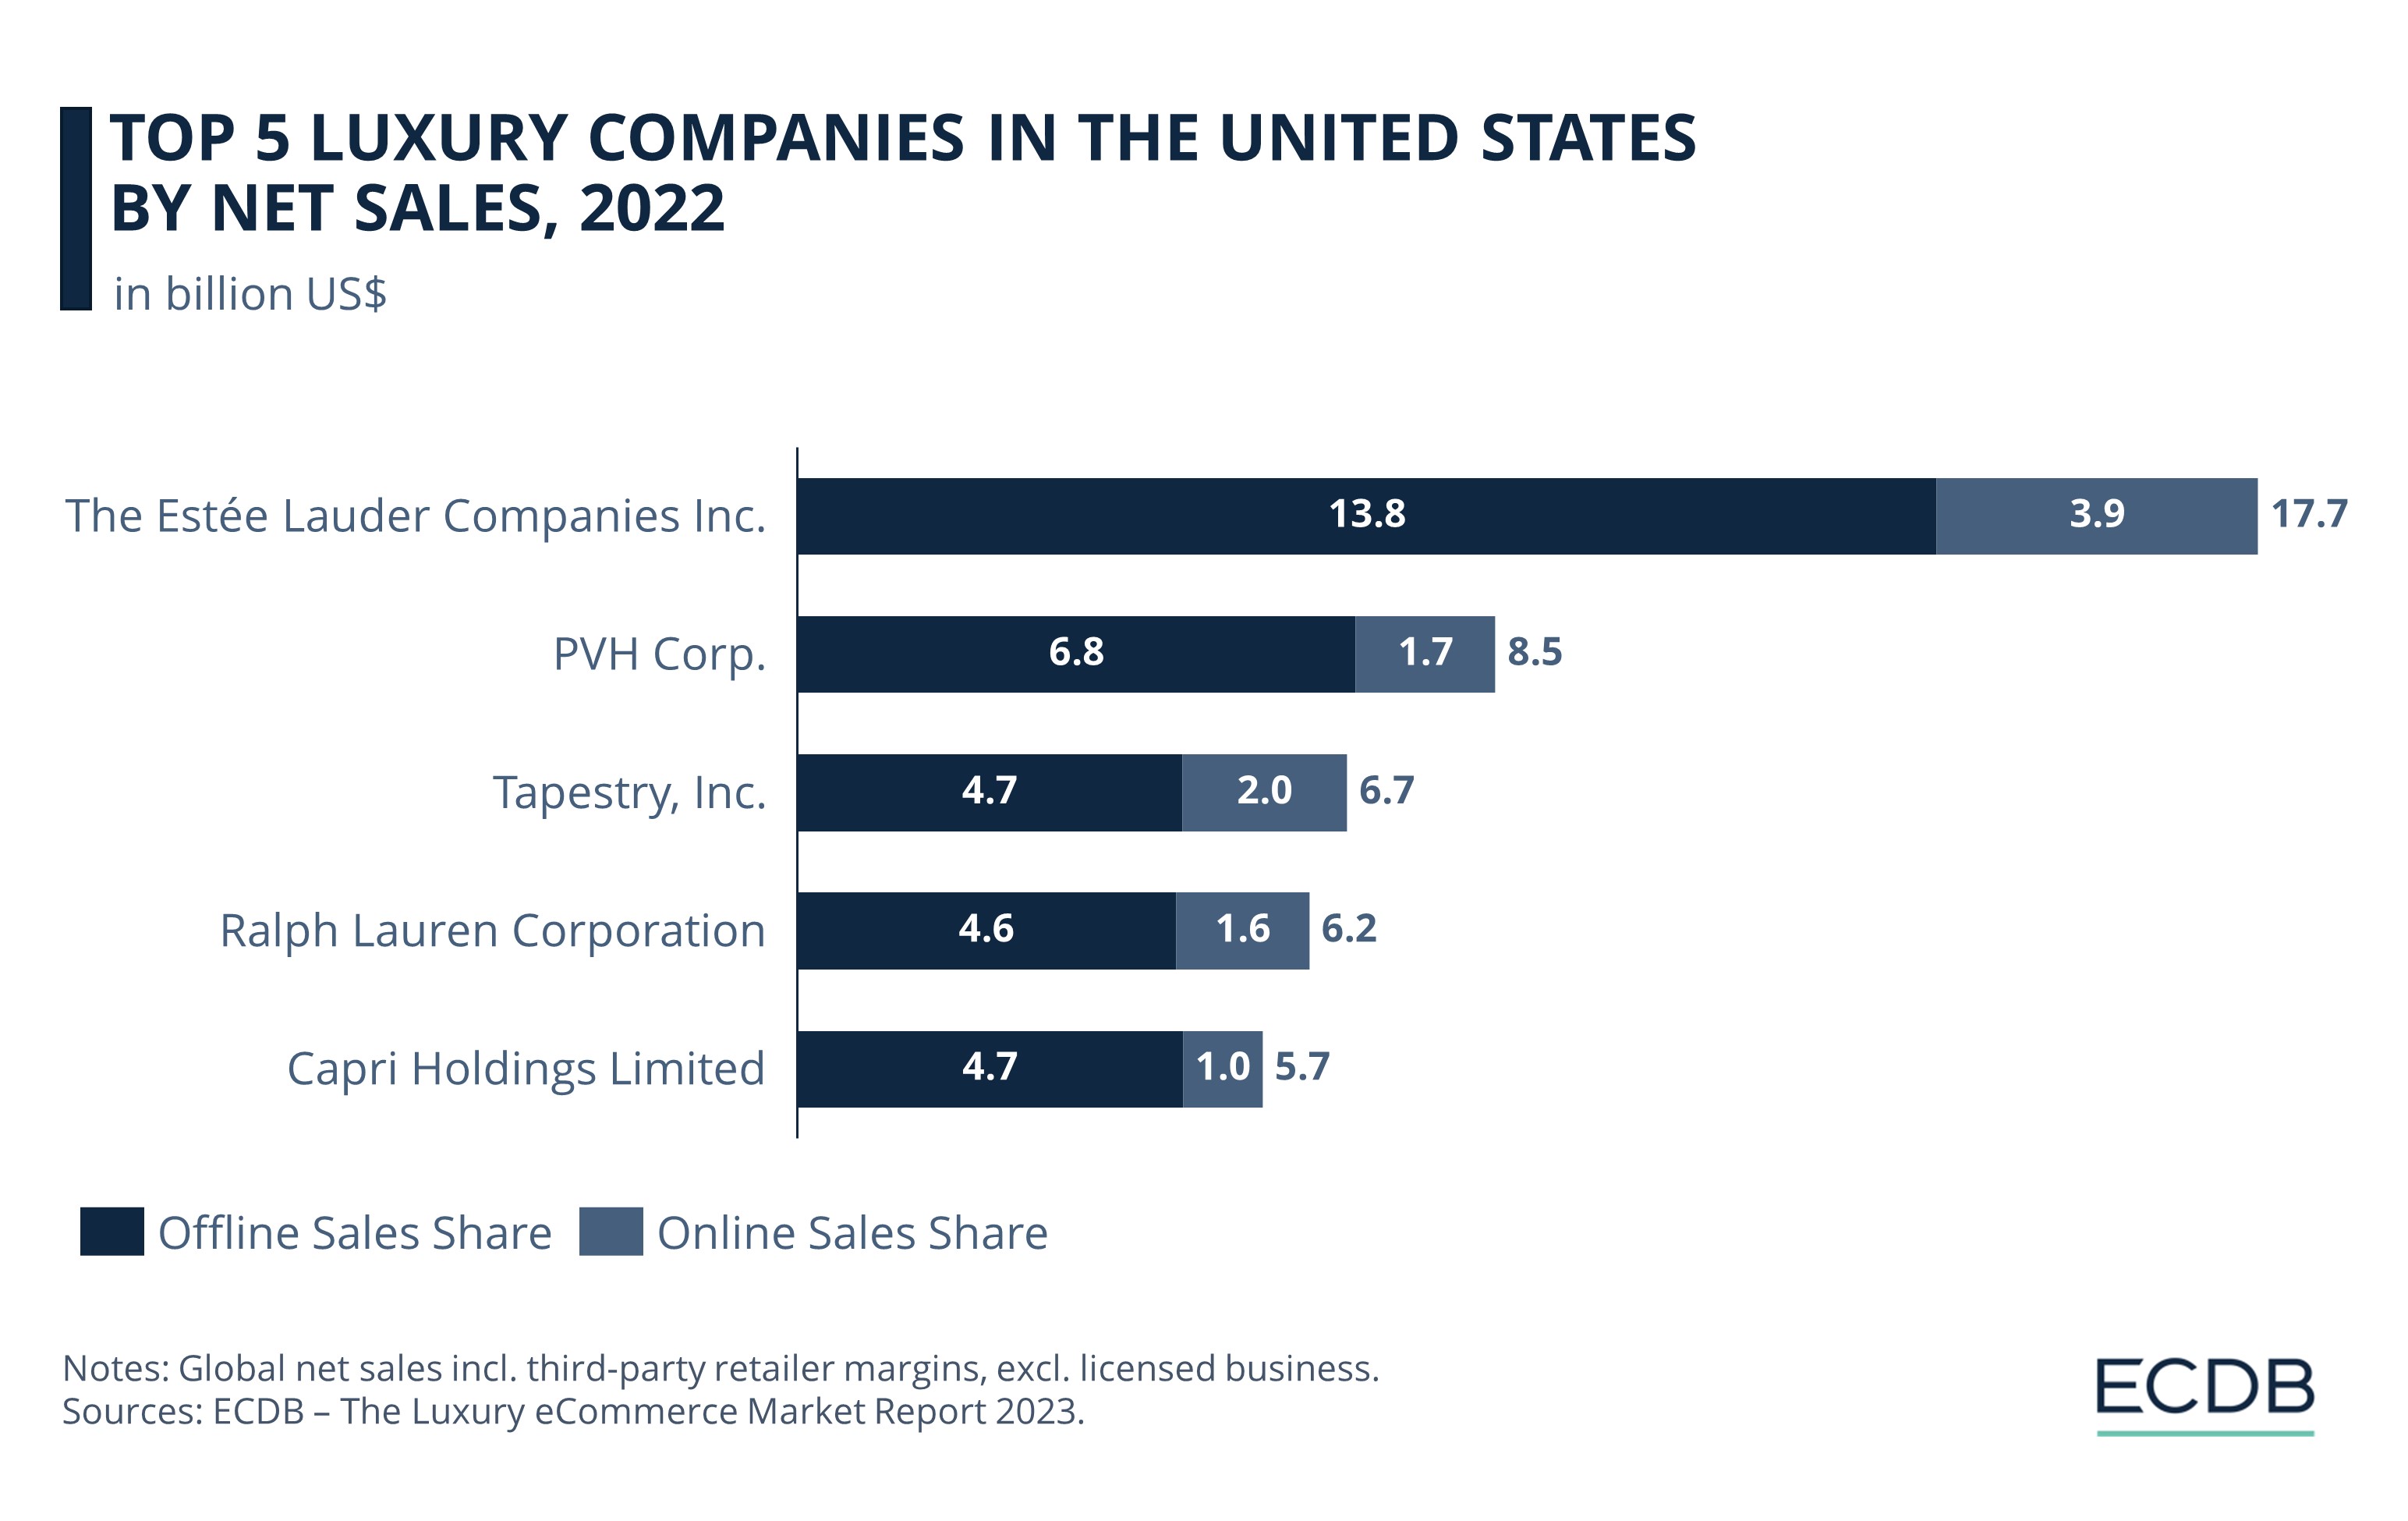 Leading Five Luxury Companies in The United States by Net Sales In 2022